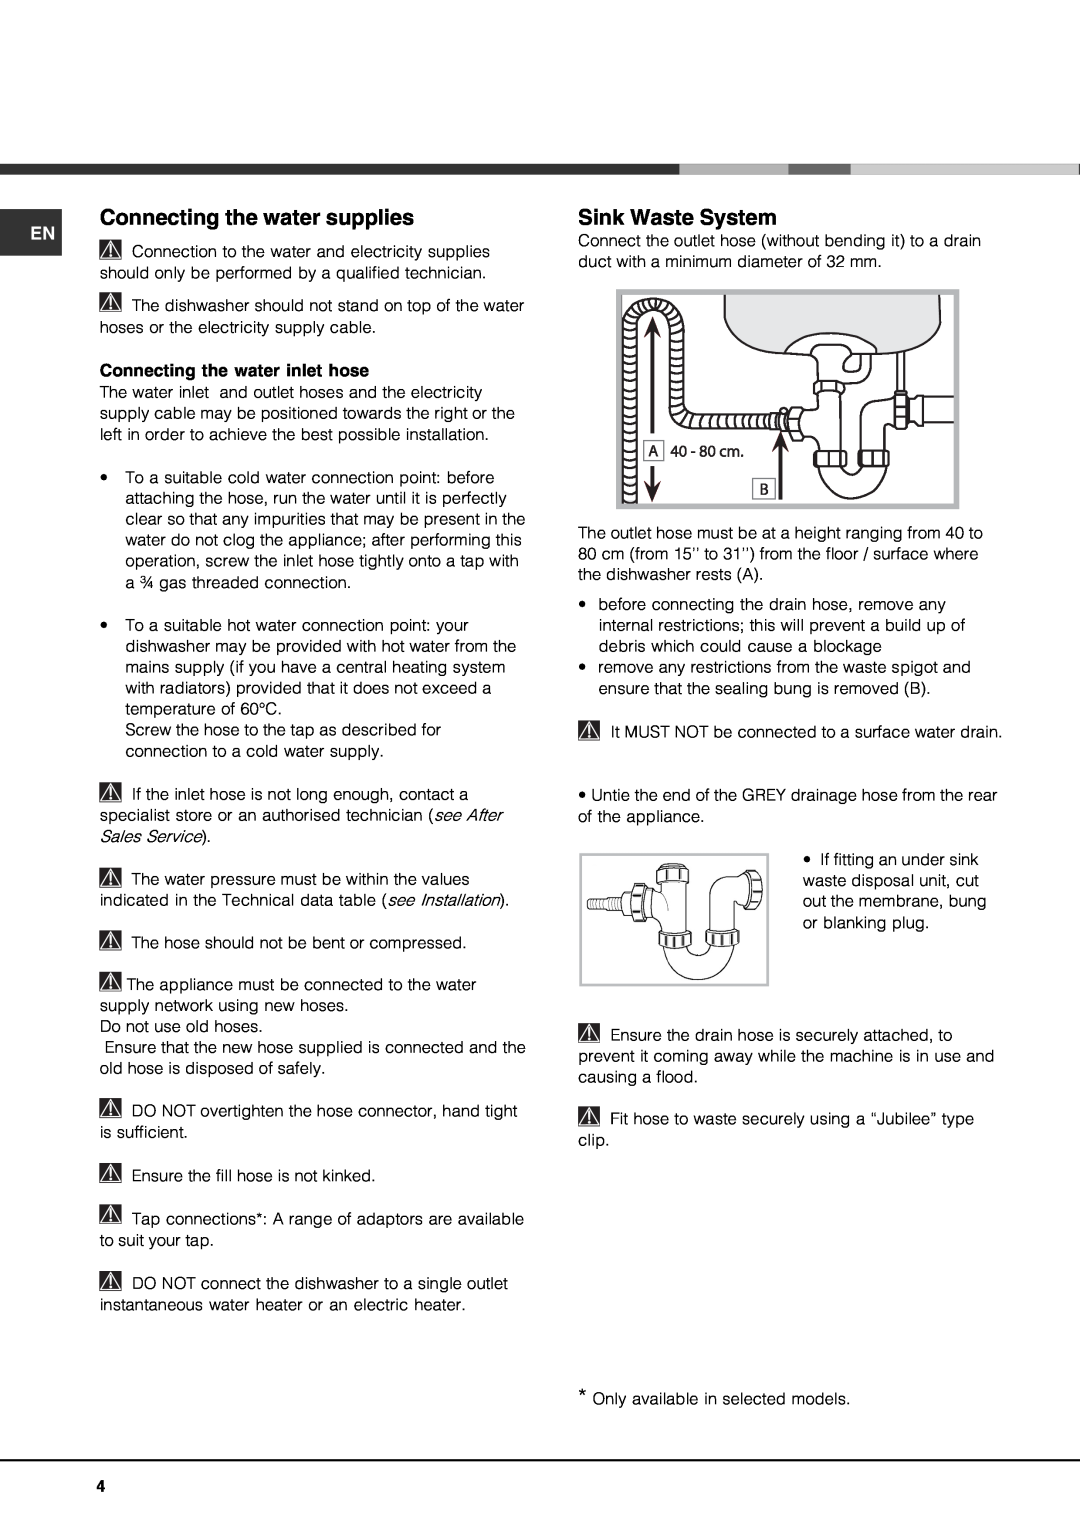 Hotpoint SDL 510 manual Connecting the water supplies, Sink Waste System, Connecting the water inlet hose 